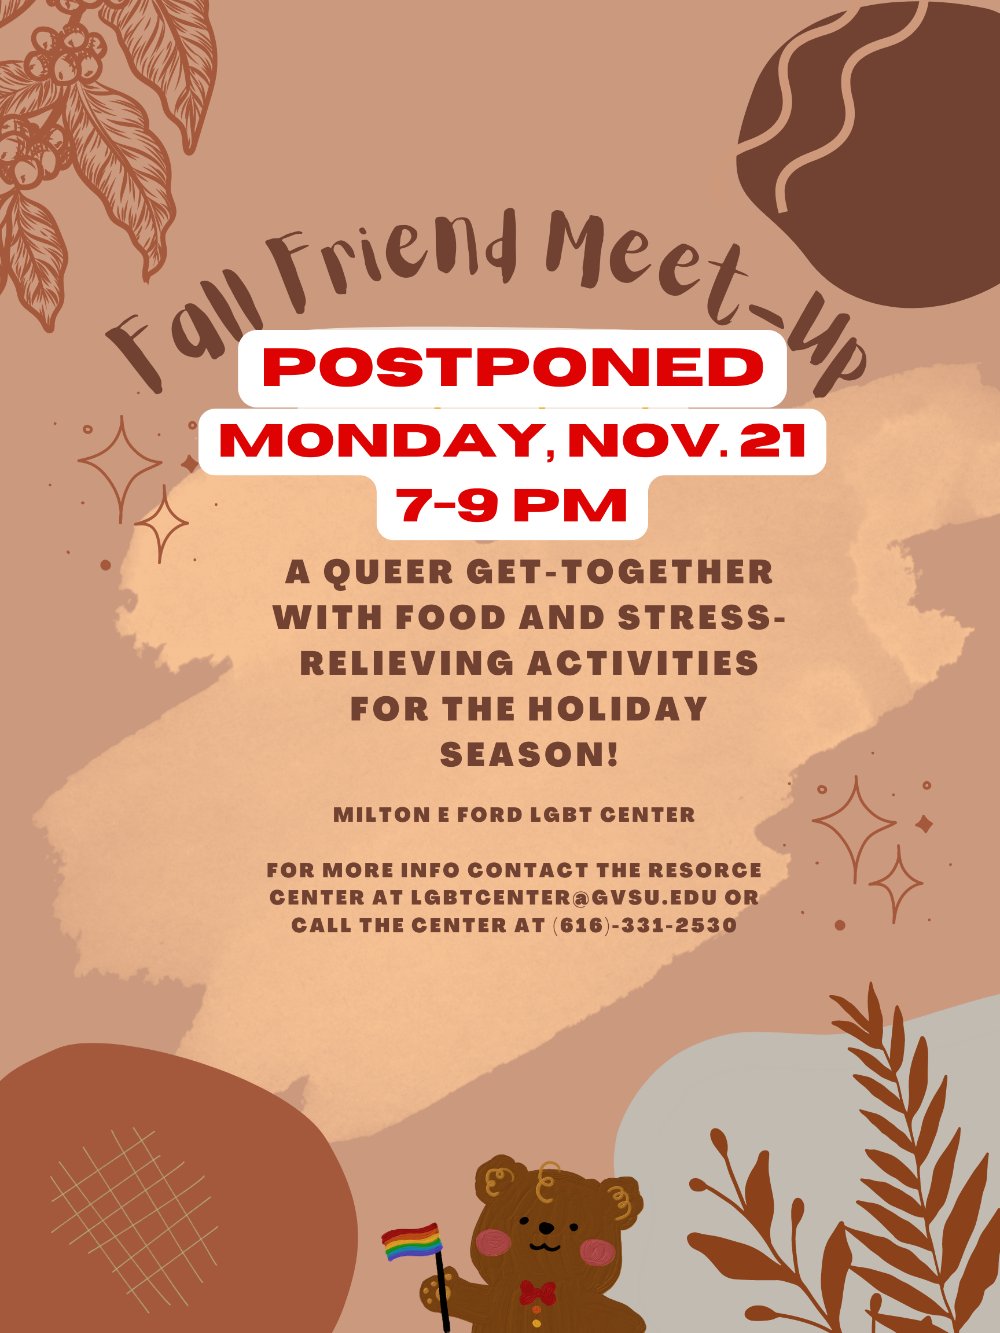 Fall Friend Meet-Up Flyer, a light brown background with dark brown leaves and text that reads: Fall Friend Meet-Up POSTPONED Monday Nov 21, 7-9PM. A Queer get-together with food and stress-relieving activities for the holiday season!